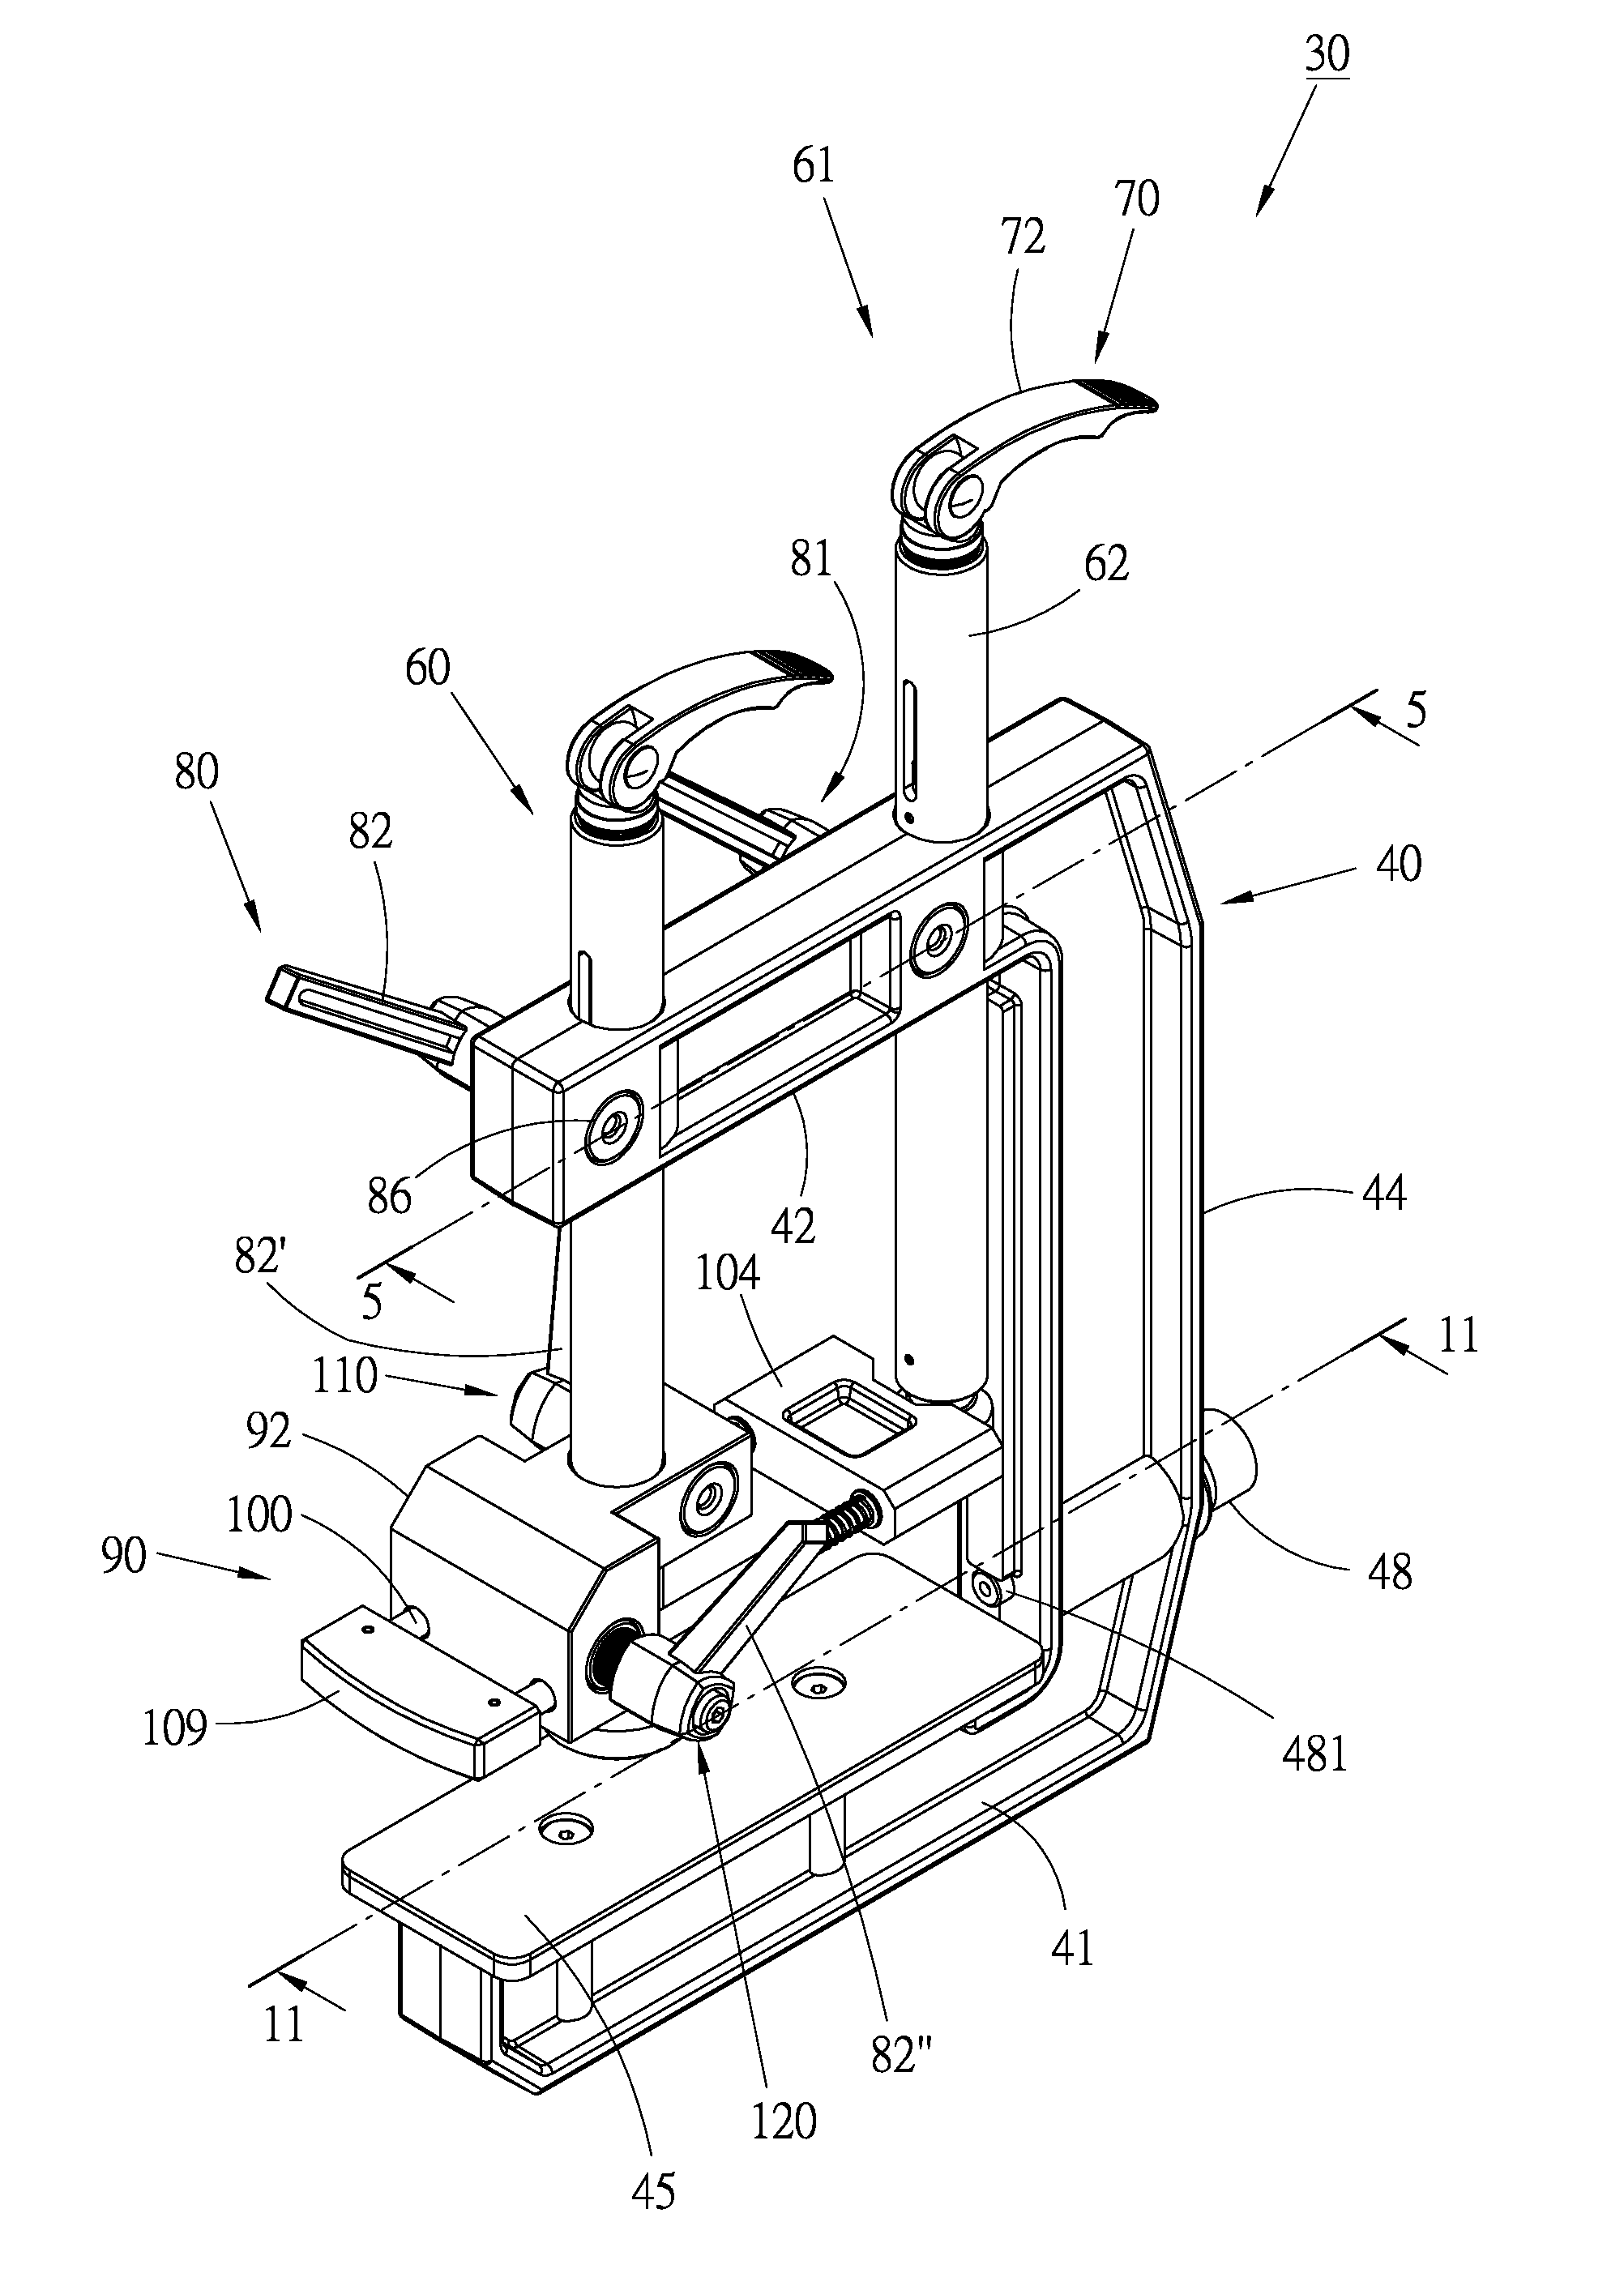 Clamping device for adjoining board materials